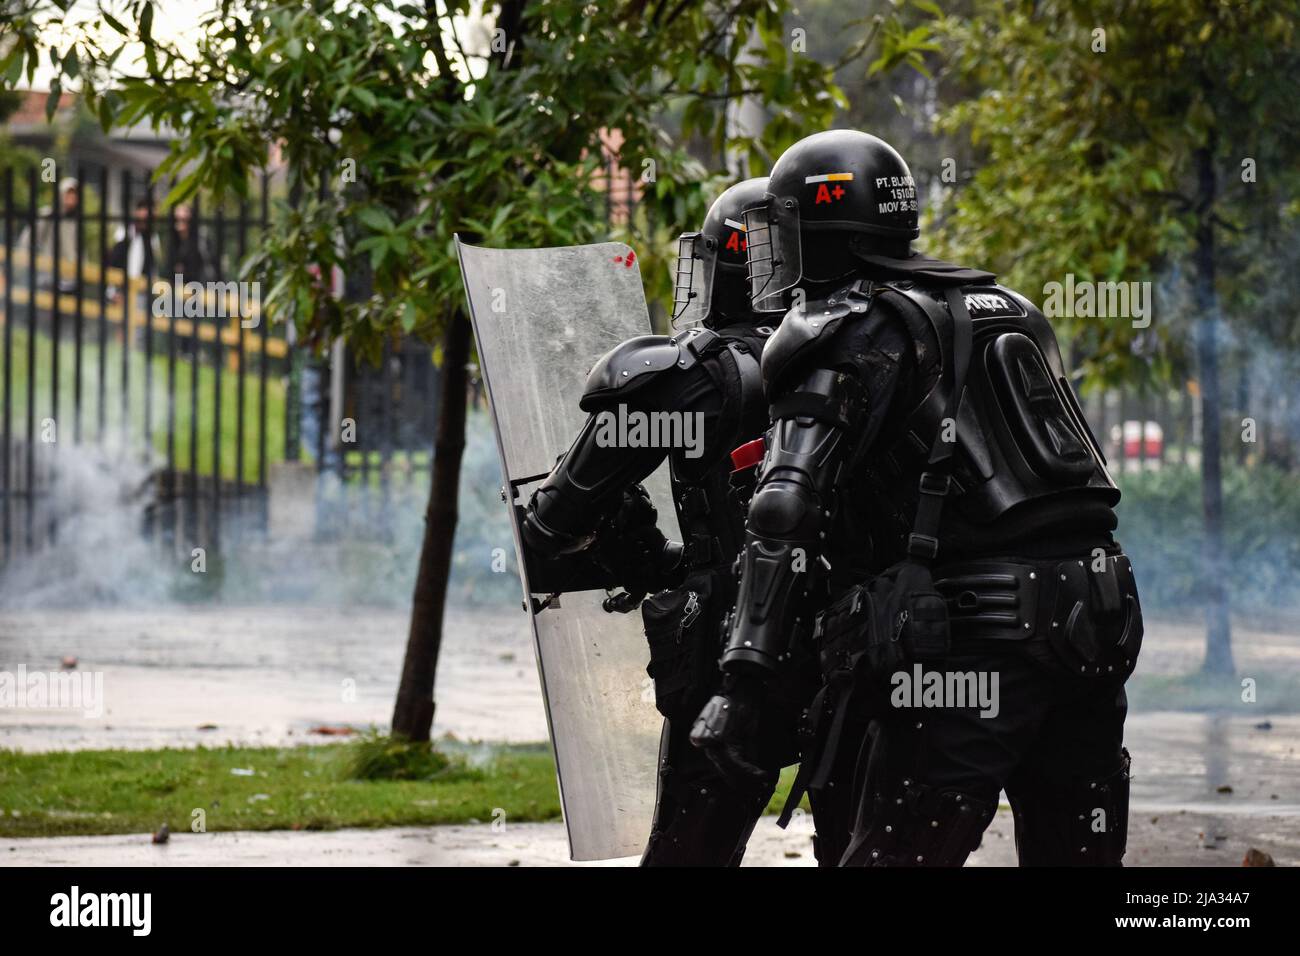 Demonstrations and clashes take place at 'Universidad Nacional de Colombia' between demonstrators and Colombia's anti-riot police 'ESMAD' in Bogota, Colombia on May 26, 2022. Photo by: Cristian Bayona/Long Visual Press Stock Photo